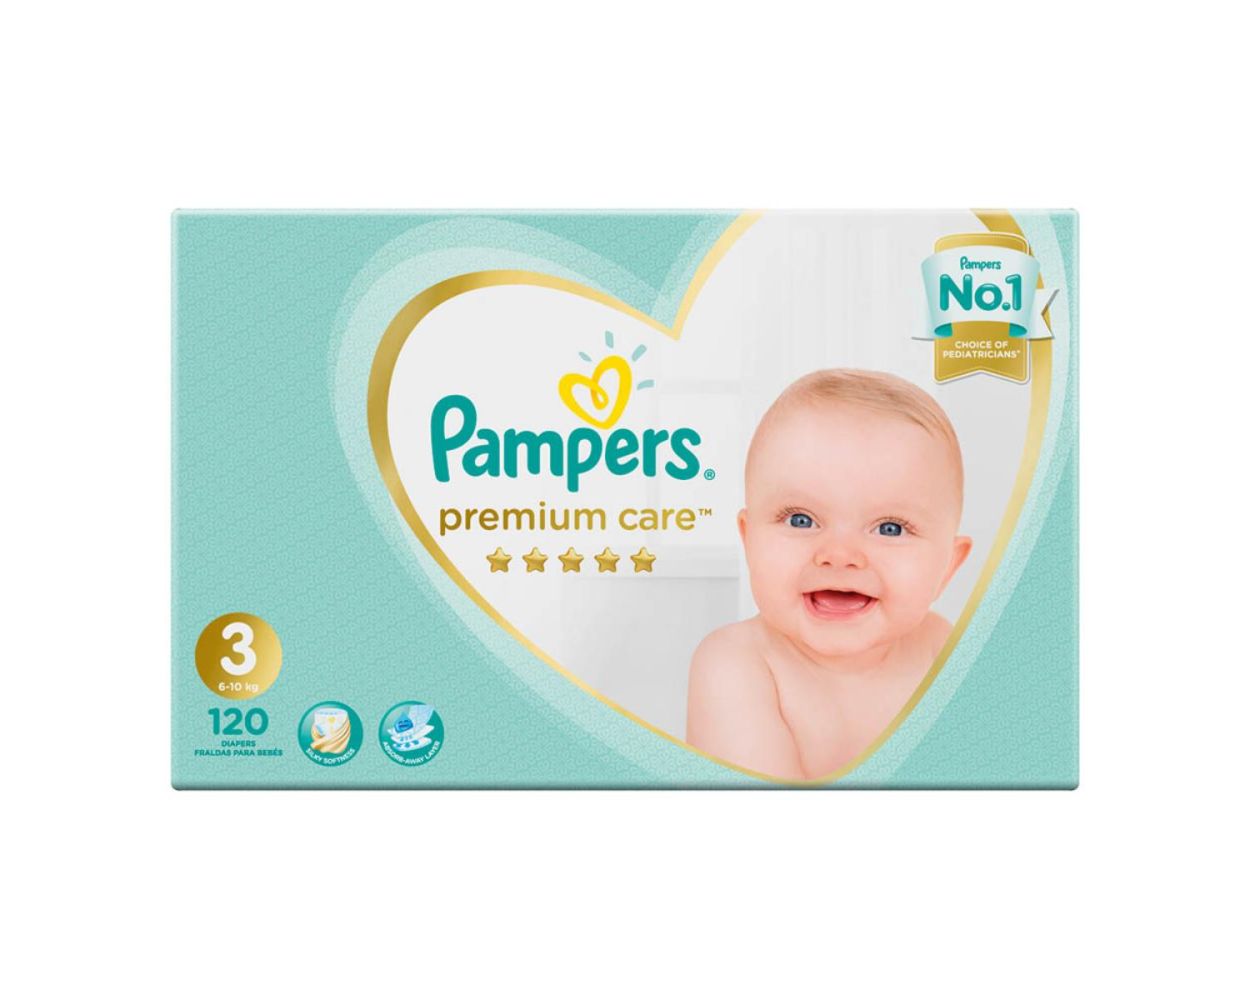 czym sie rozni pampers od pampers premium care